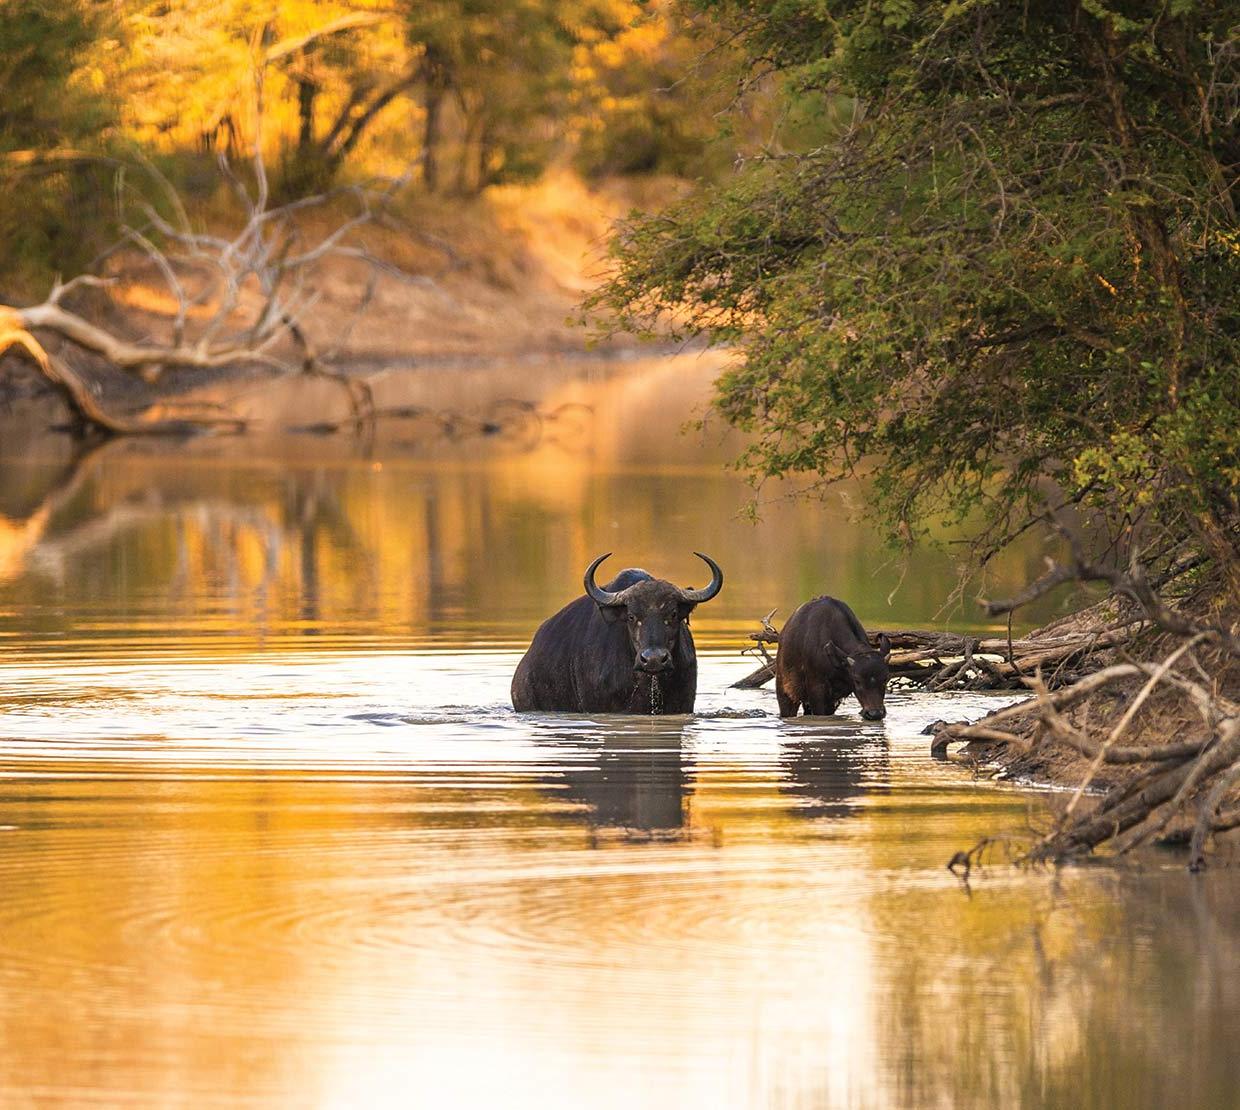 water buffalo drinking from a river